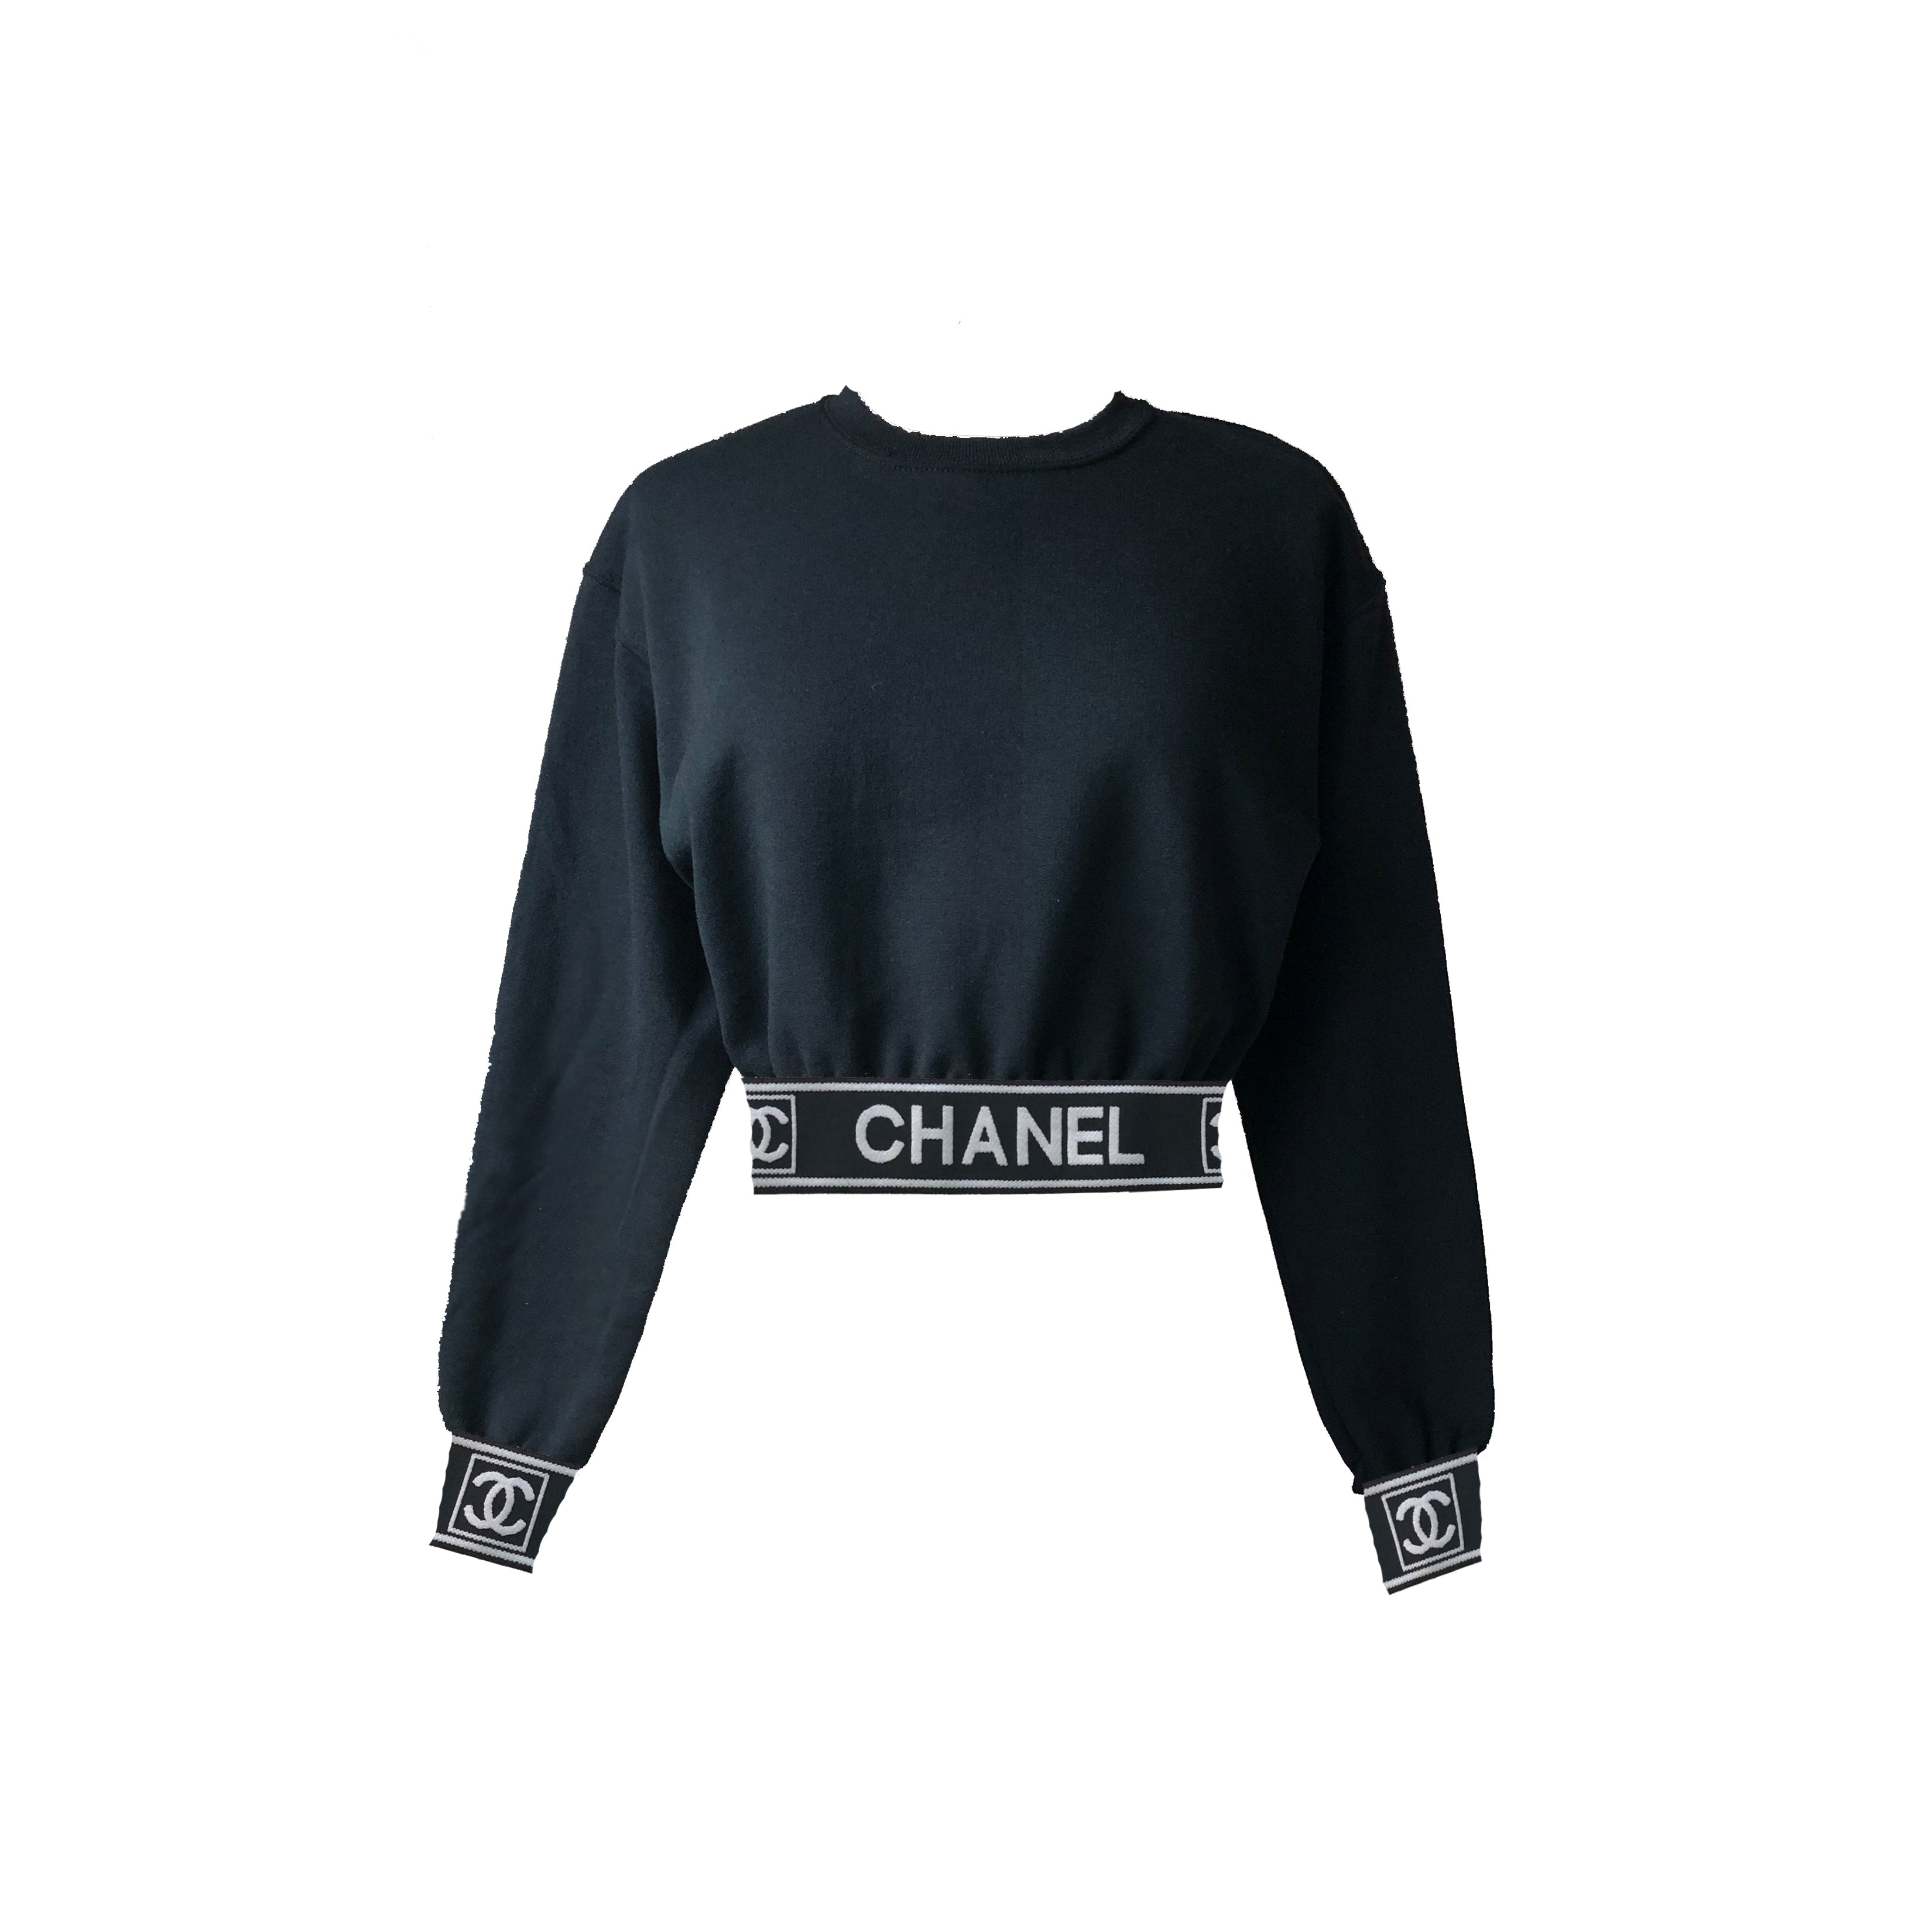 Chanel Shirts & Blouses for Sale at Auction